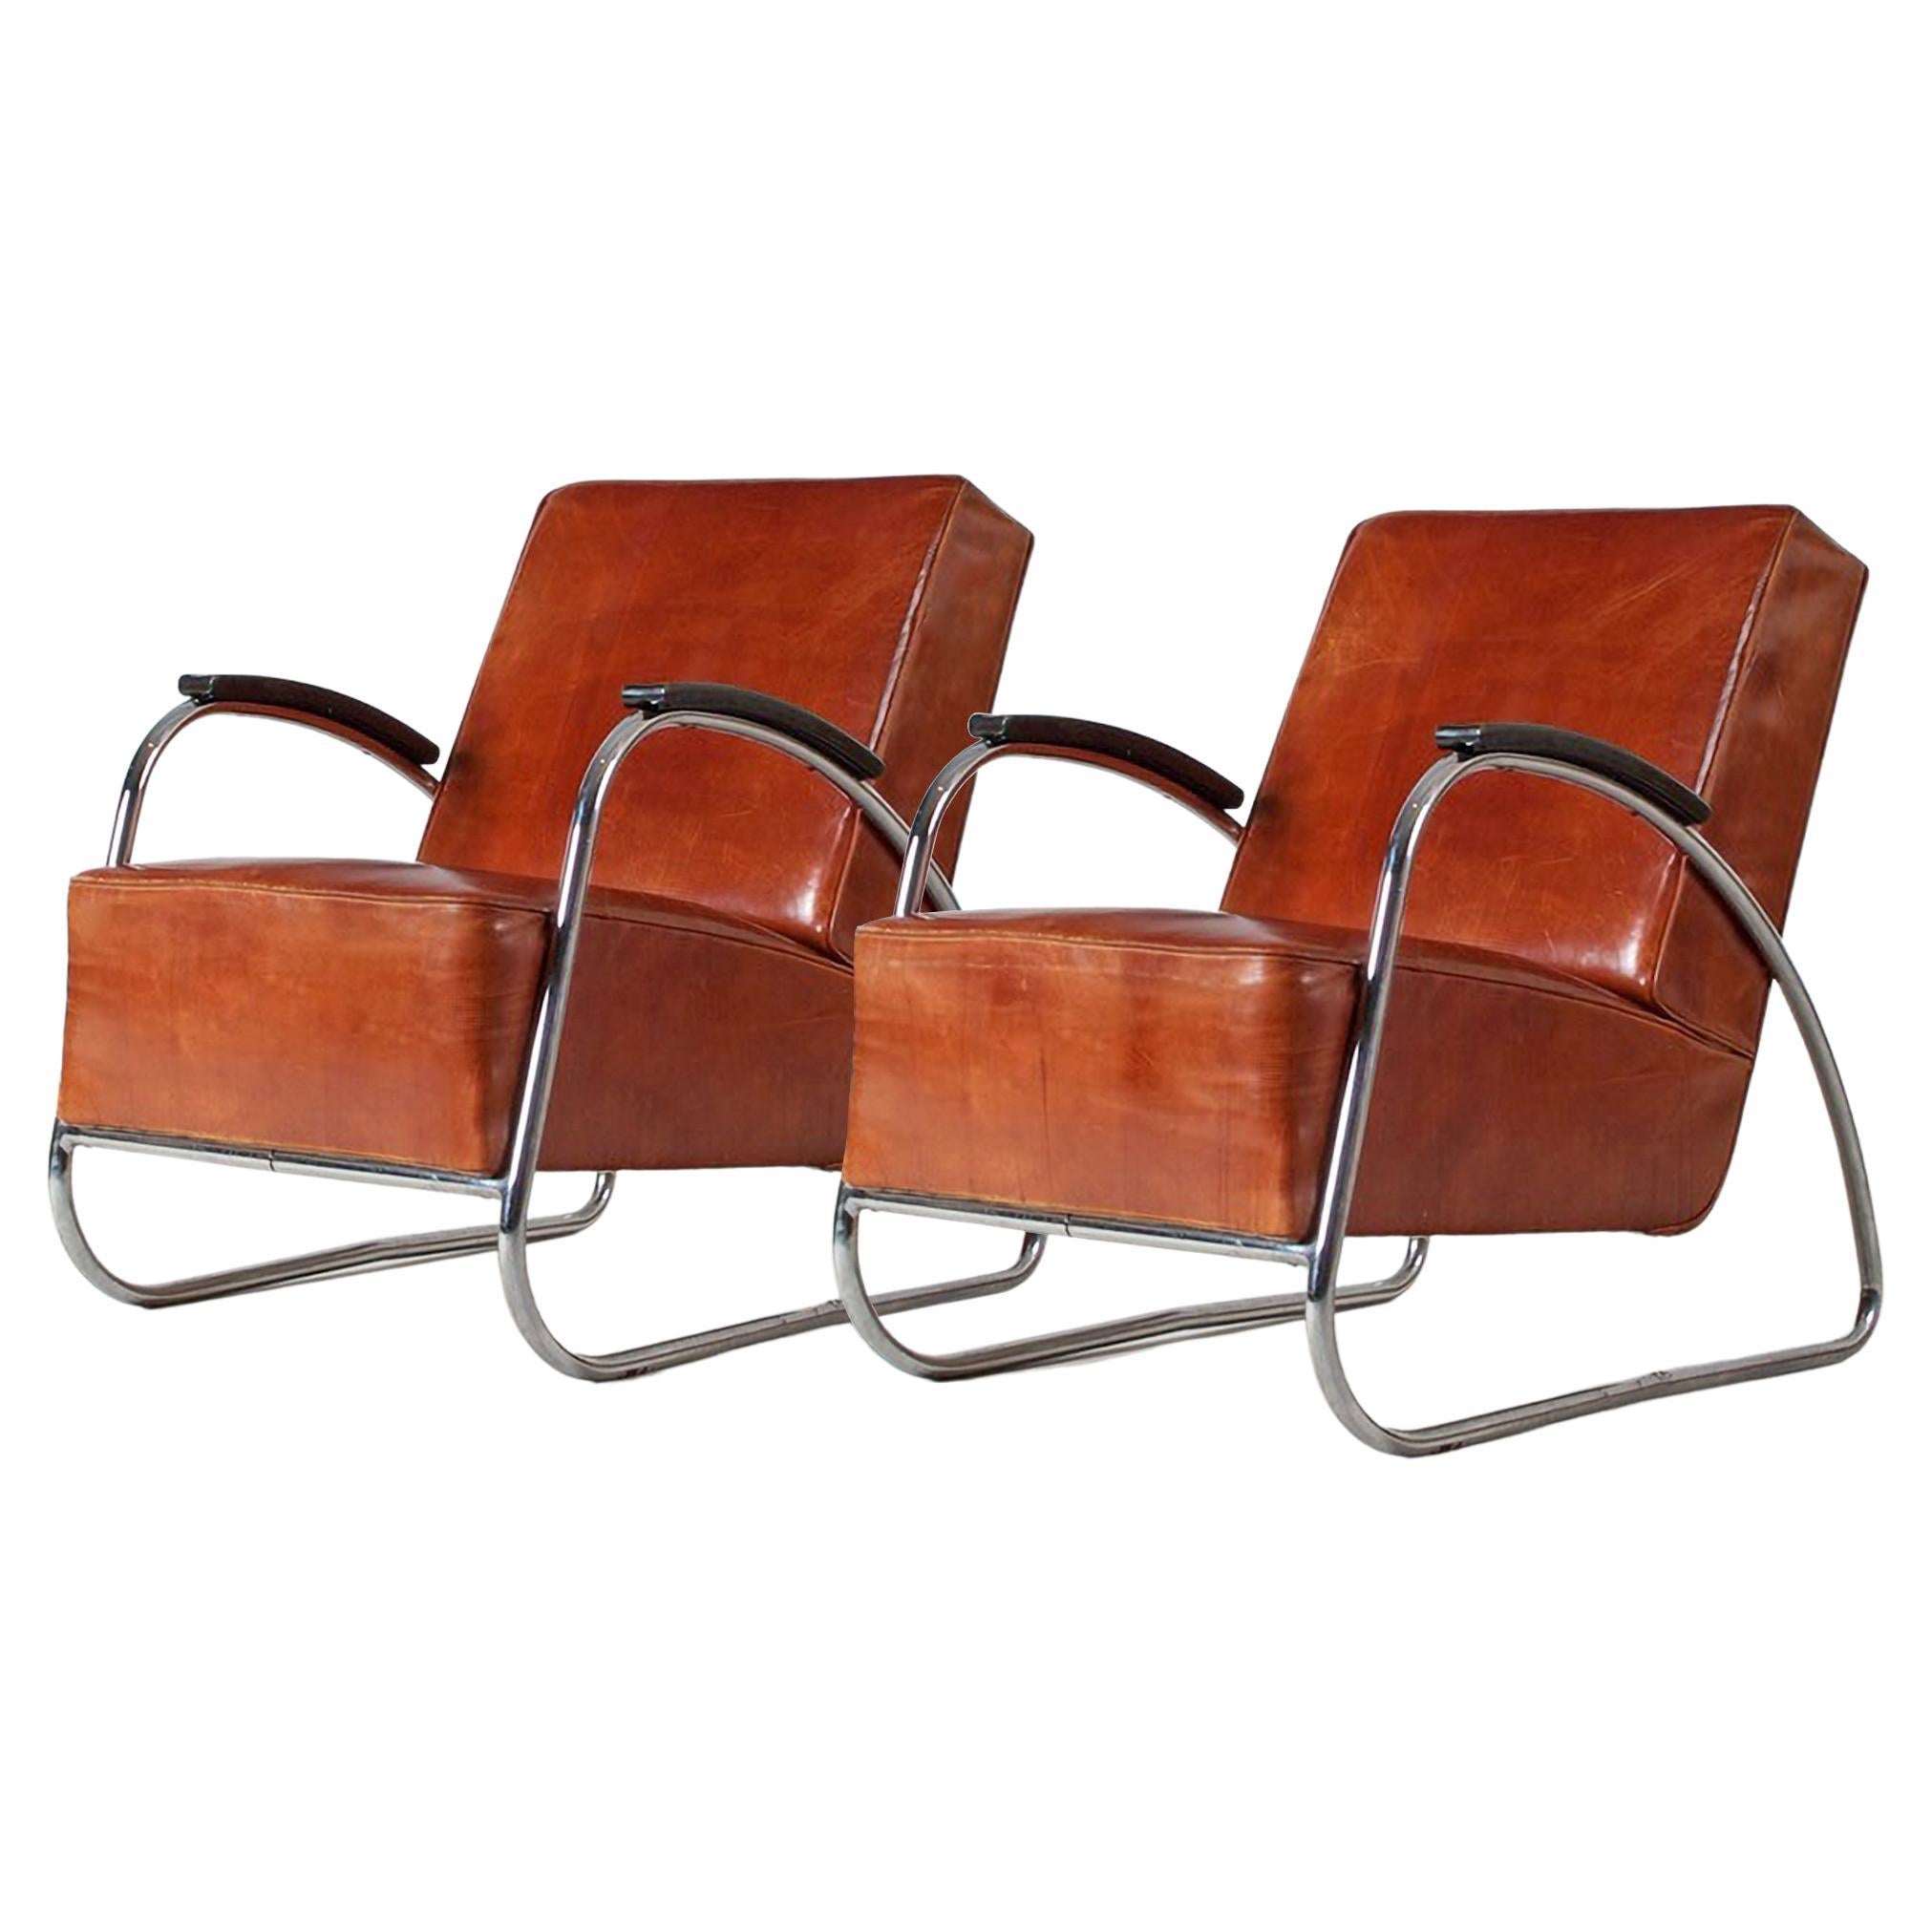 Customizable Modernist Club Chair by Mauser, Chromed Metal, Leather Upholstery For Sale